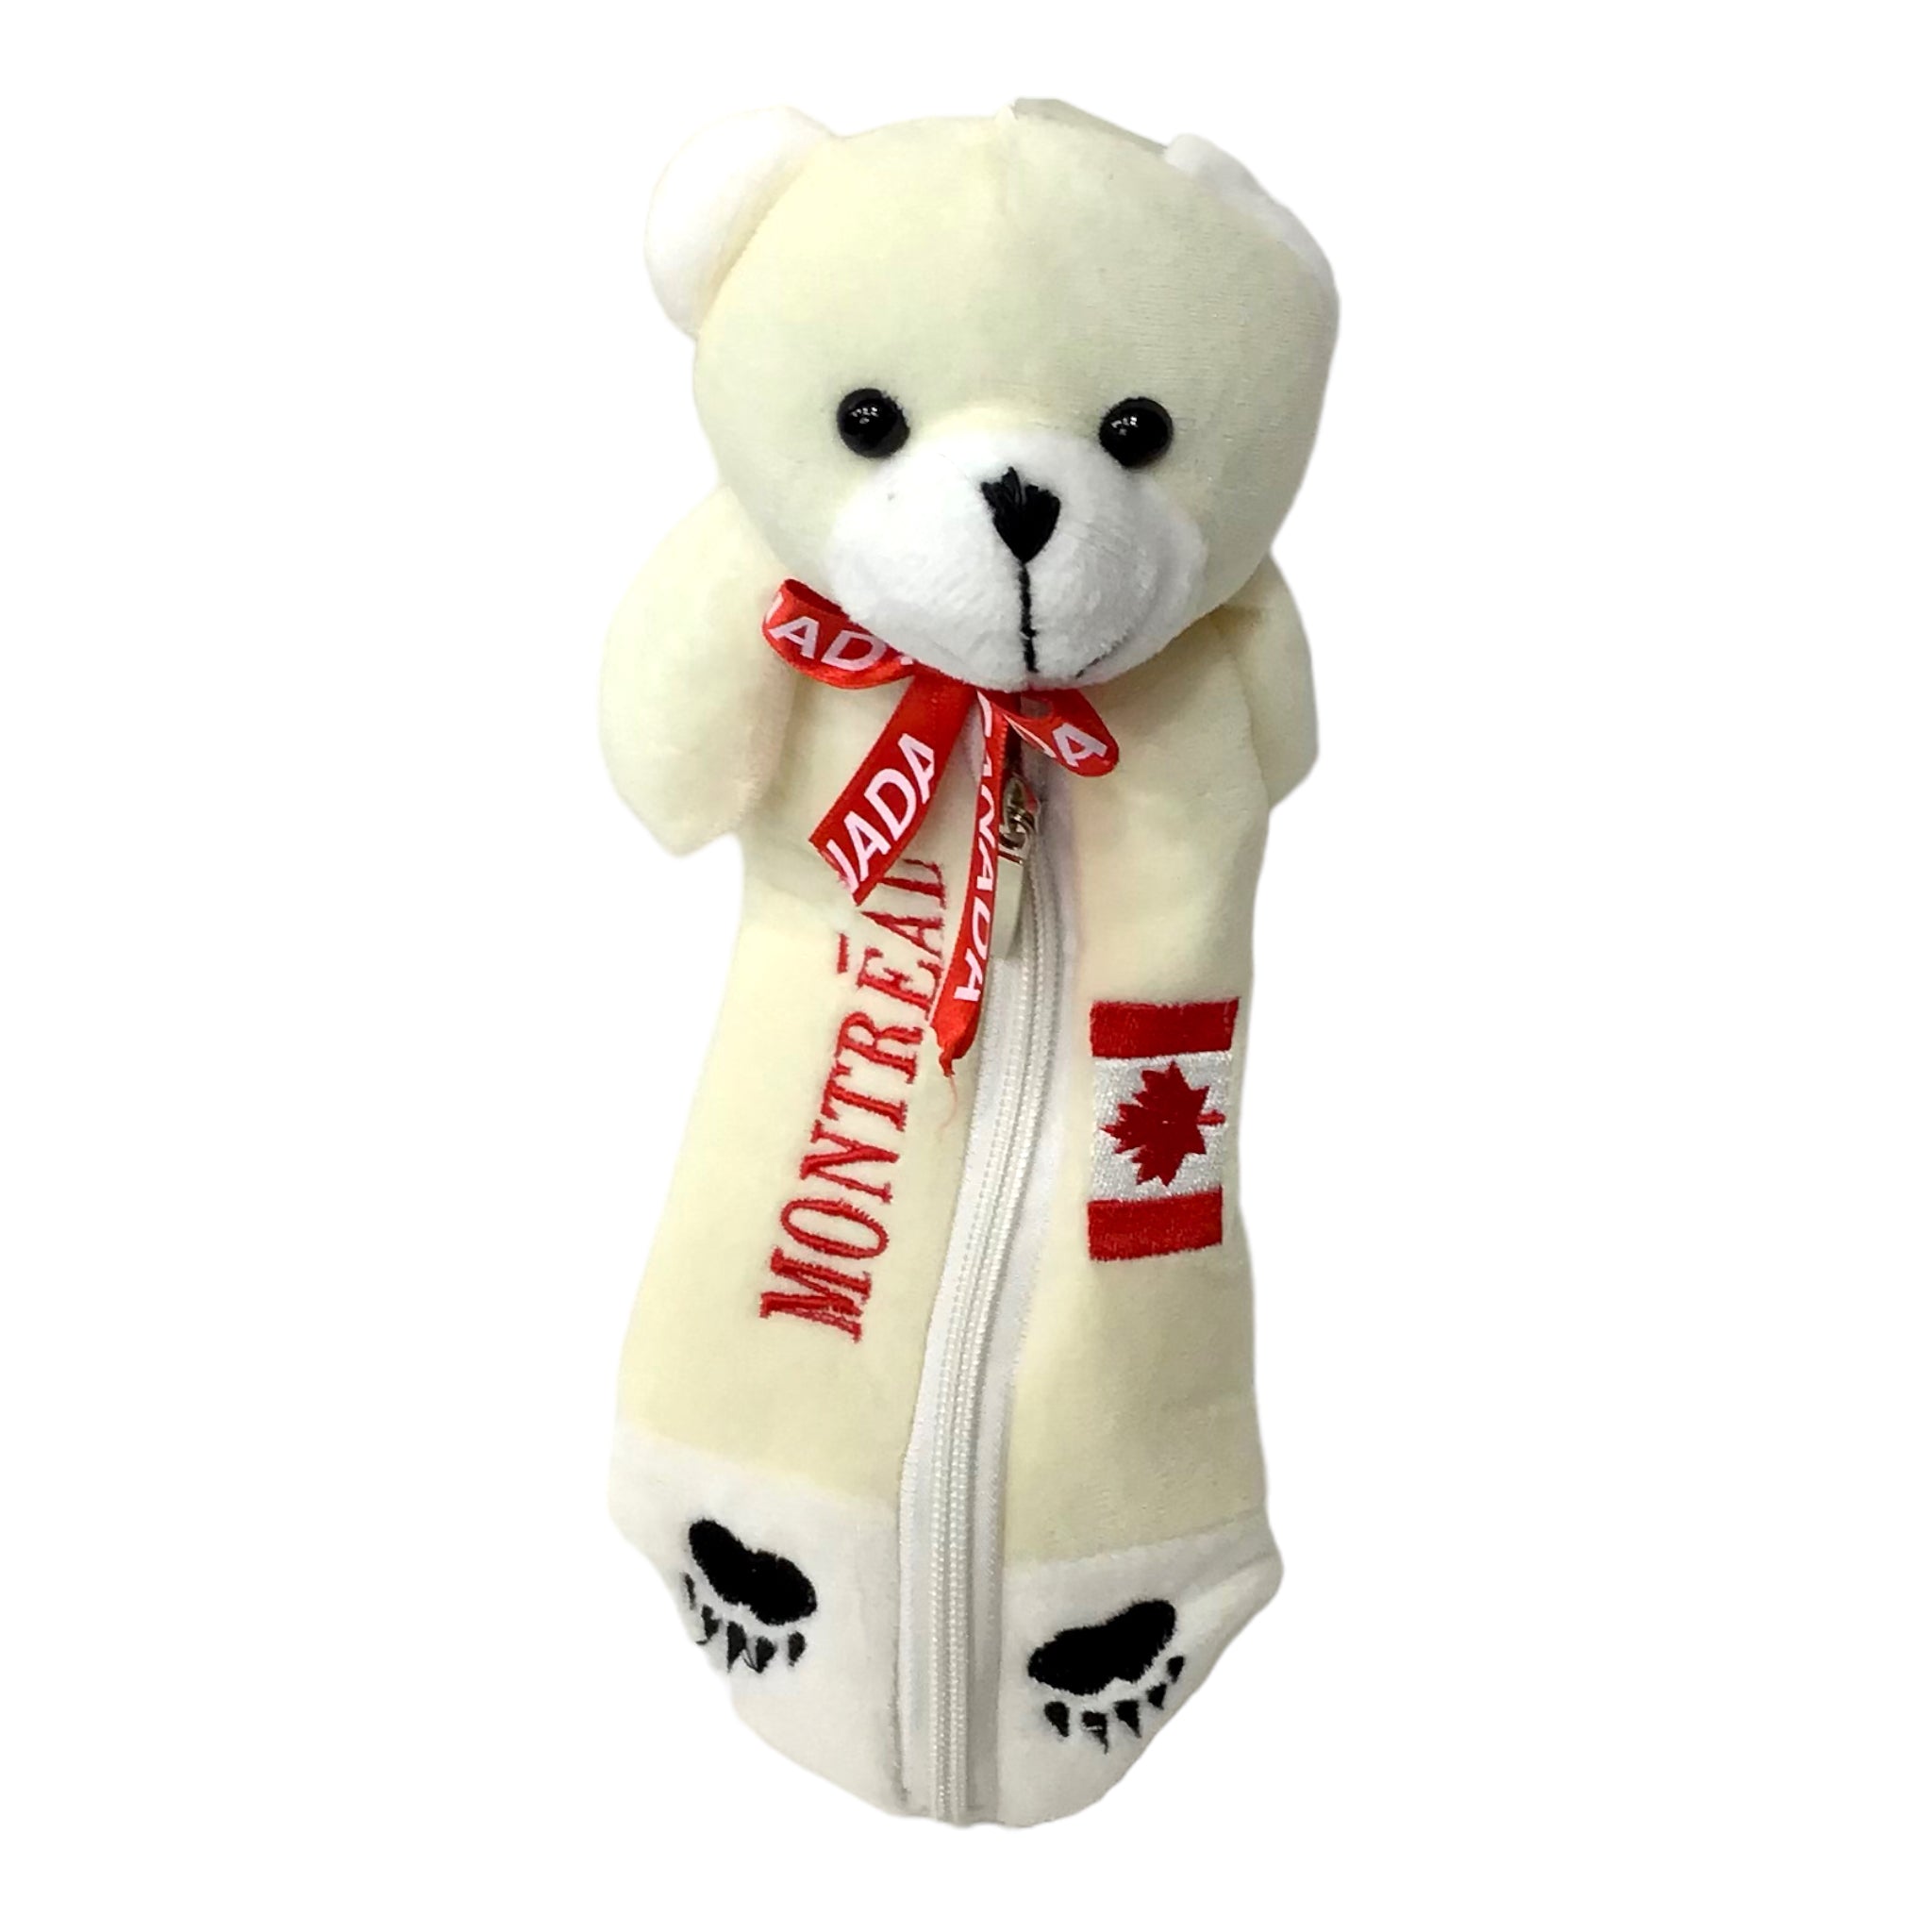 MOOSE BEAR PENCIL CASE PLUSH W/ CANADIAN FLAG AND MONTREAL NAME DROP EMBROIDERY